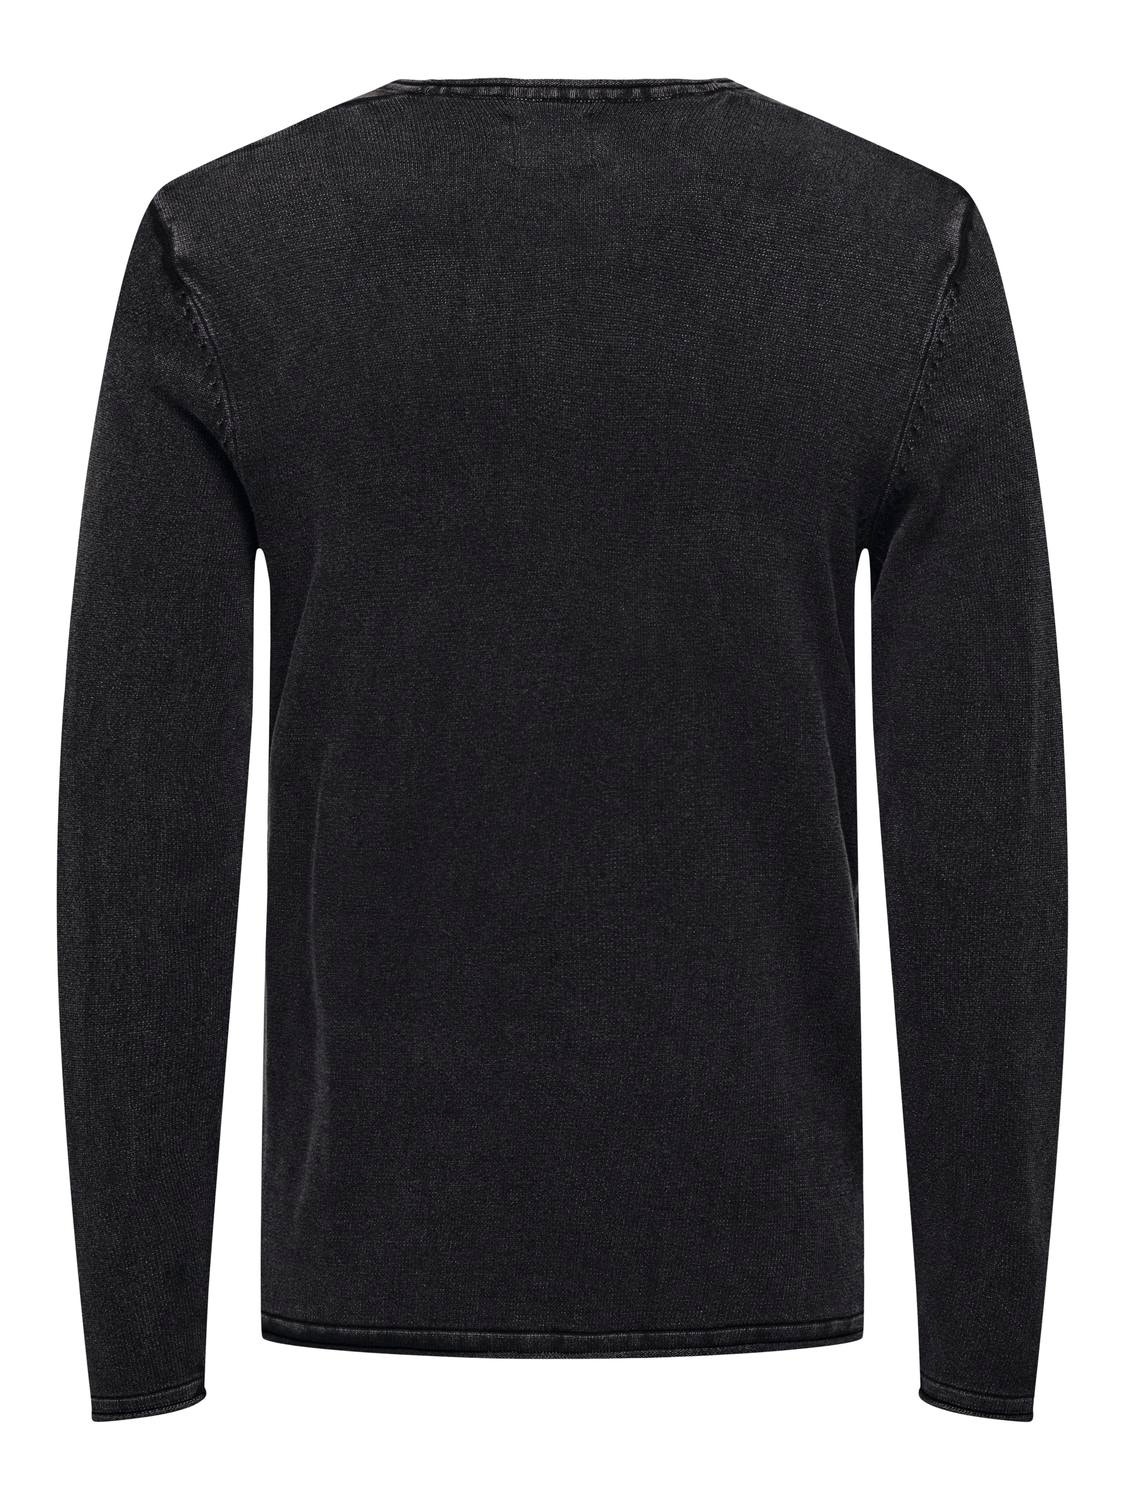 Crew neck knitted pullover | Black | ONLY & SONS®